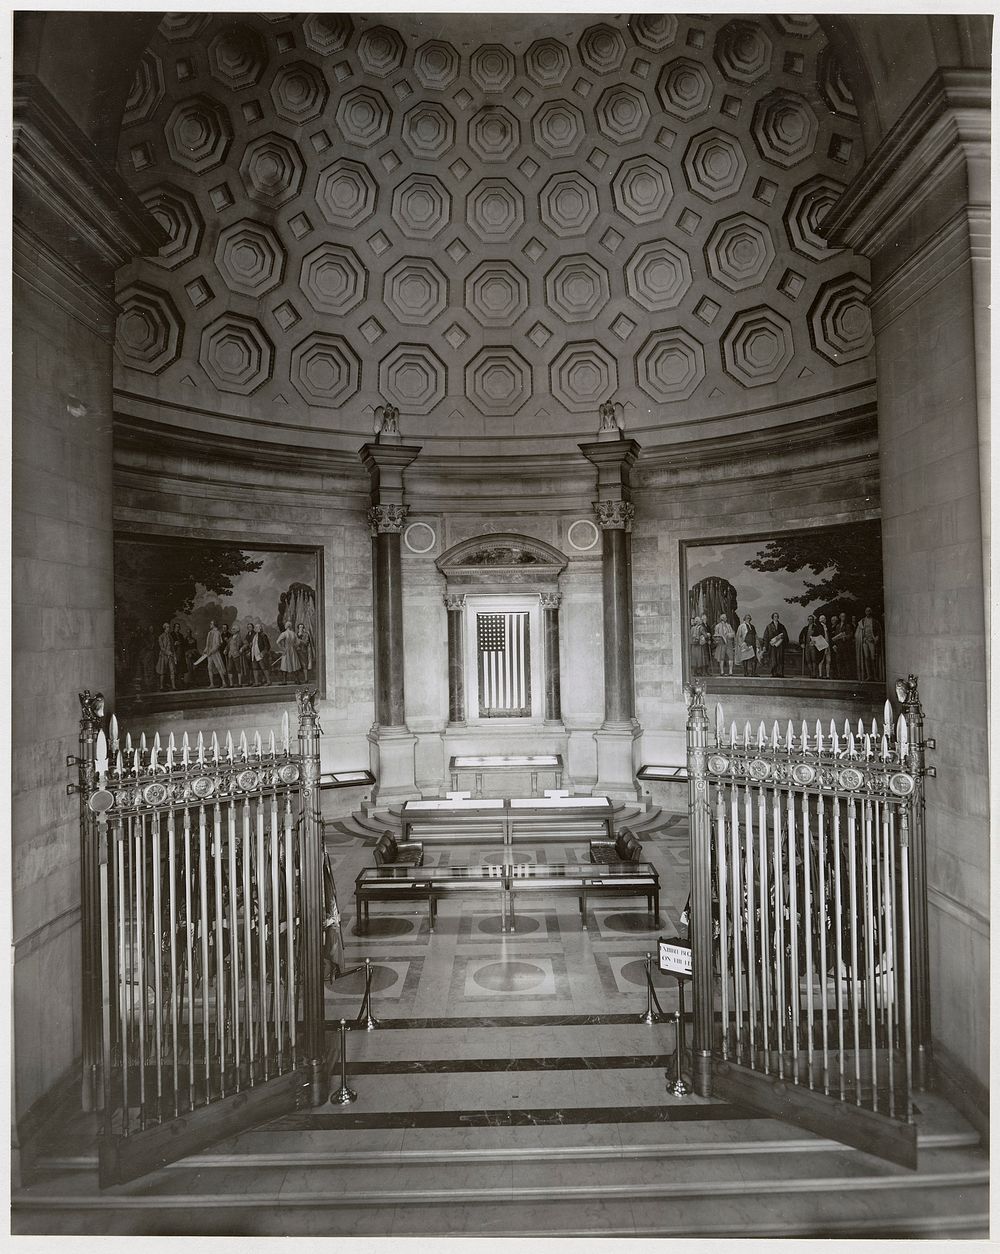 Photograph of Exhibition Hall